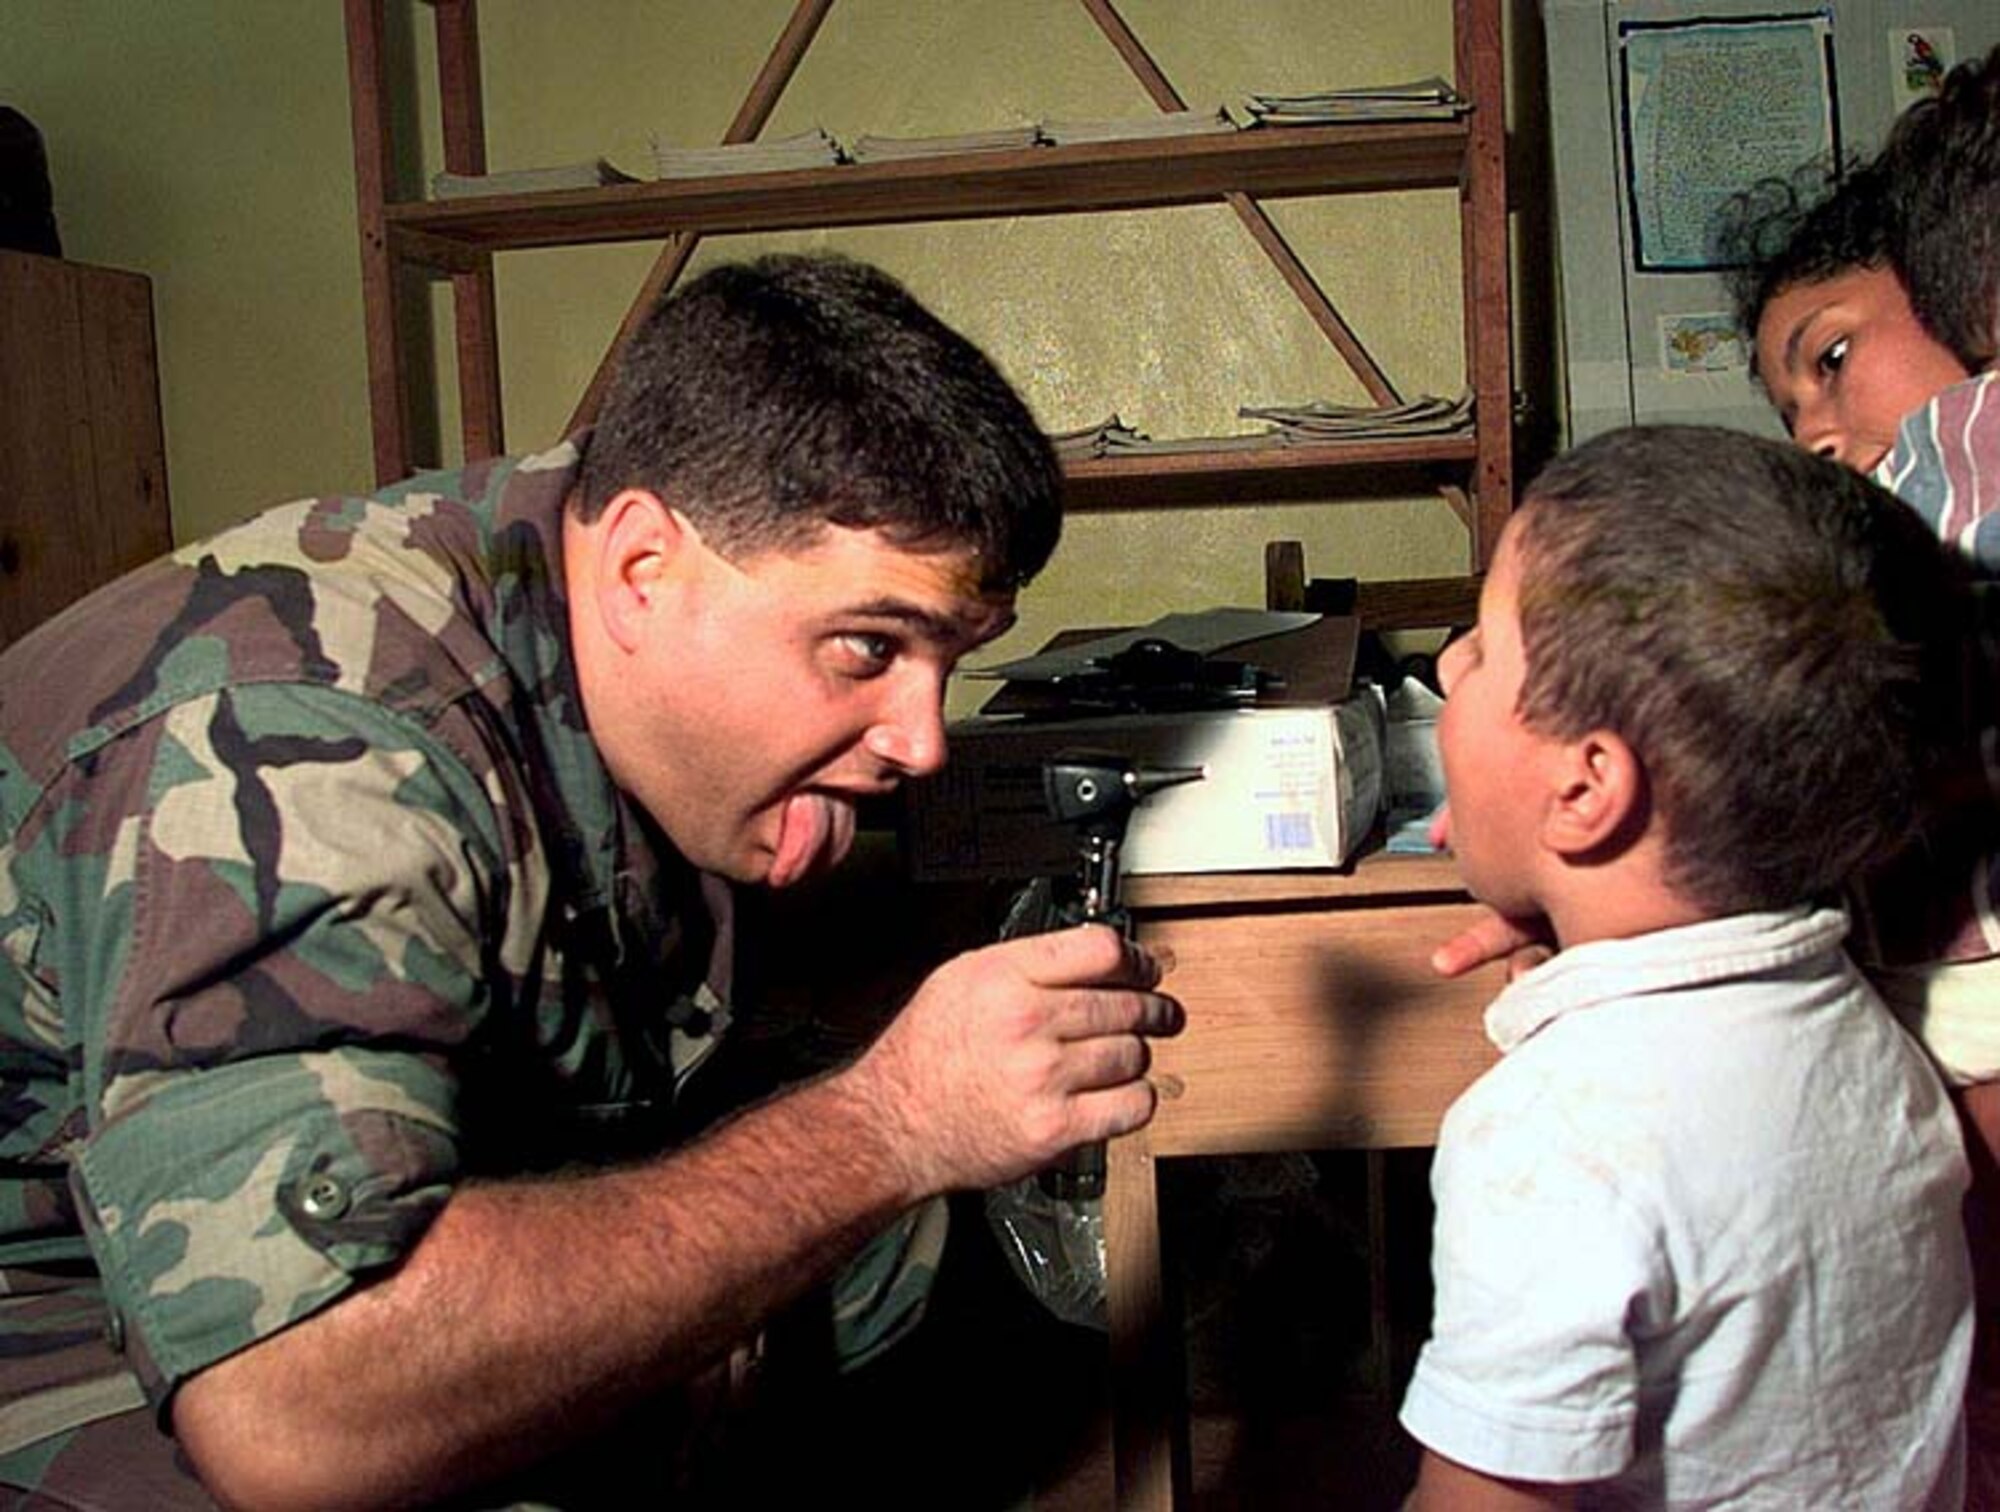 U.S. Air Force Capt. (Dr.) Cody Henderson, a pediatrician assigned to a 24th Medical Group Medical Readiness Training Exercise Team, examines a boy in a temporary field hospital in the Honduran village of Campo II, November 1998. U.S. joint-service medical teams drove into the Honduran countryside daily to treat people effected by Hurricane Mitch. (U.S. Army photo by Spc. Jeremy Ausburn)